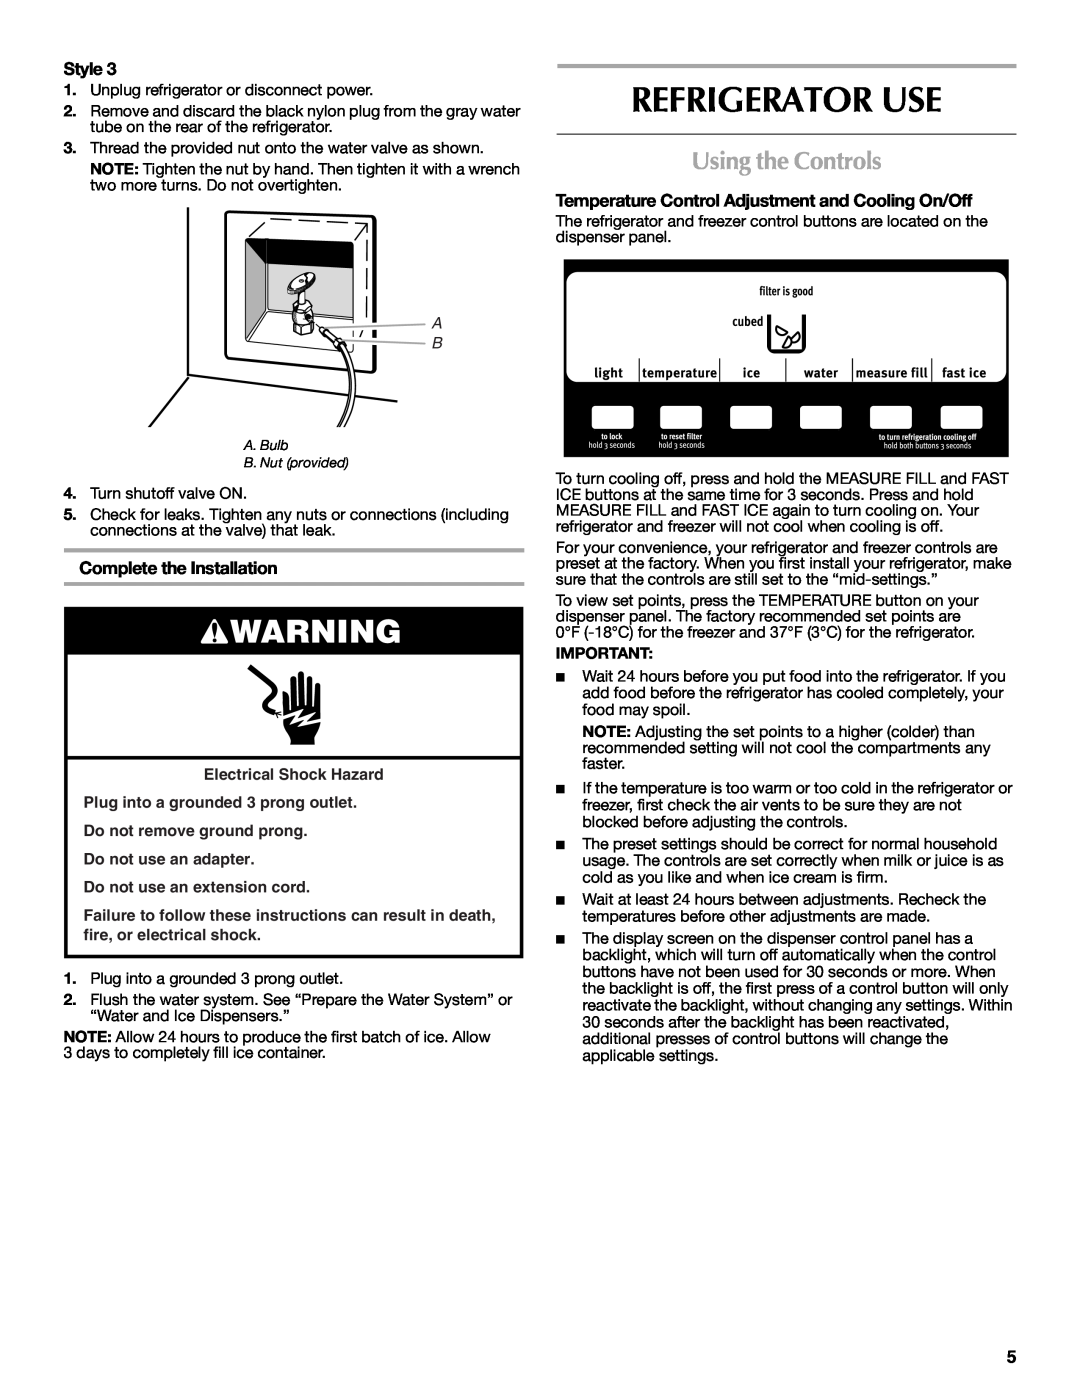 Maytag W10237808A Refrigerator Use, Using the Controls, Style, Complete the Installation, Electrical Shock Hazard 